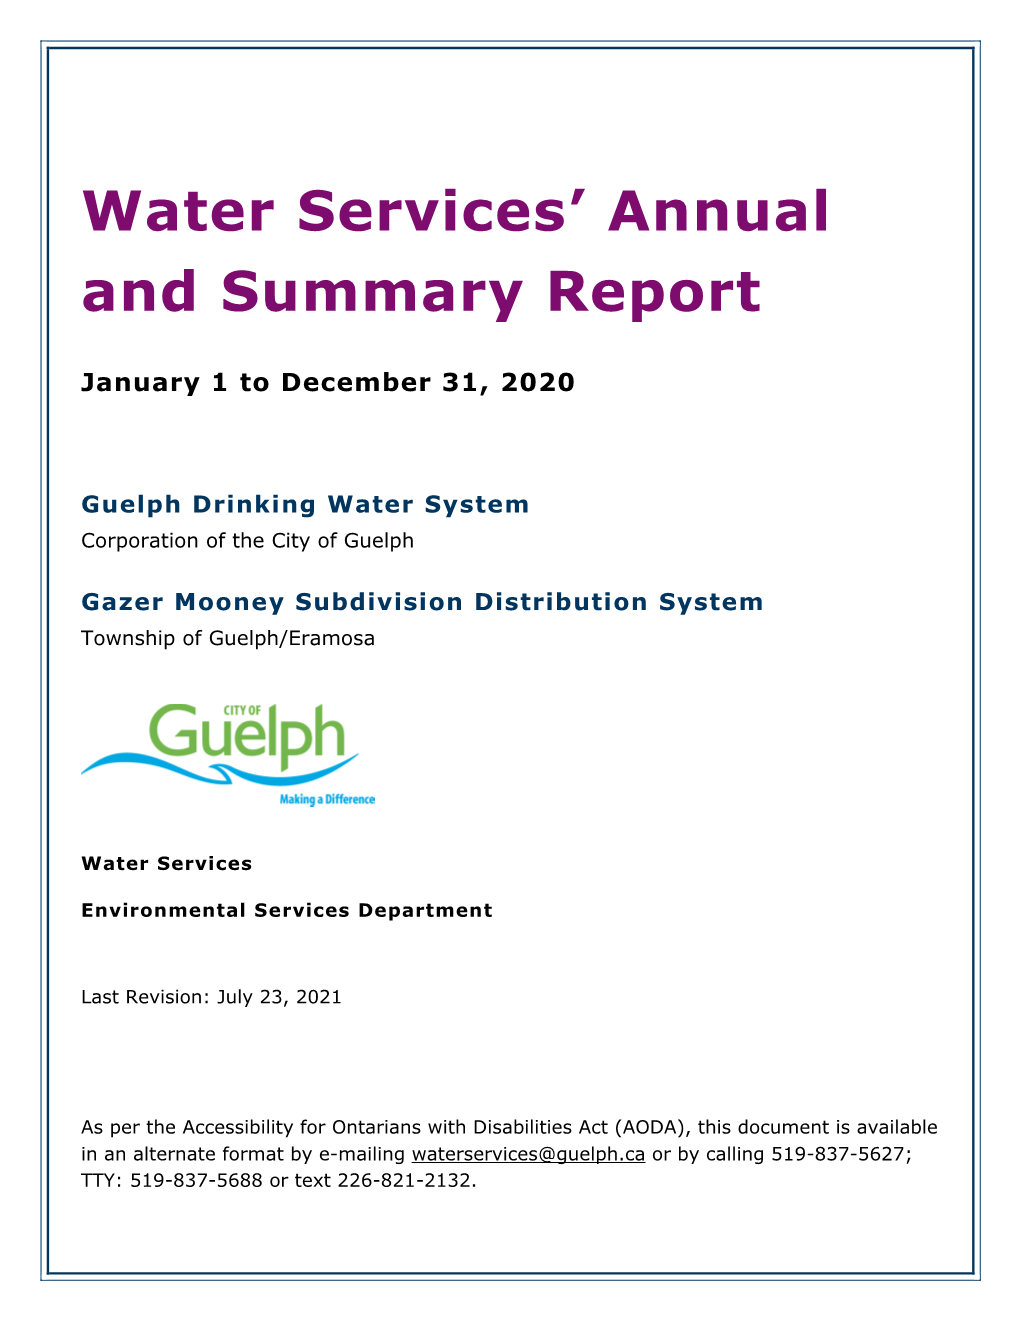 2020 Water Services Annual and Summary Report